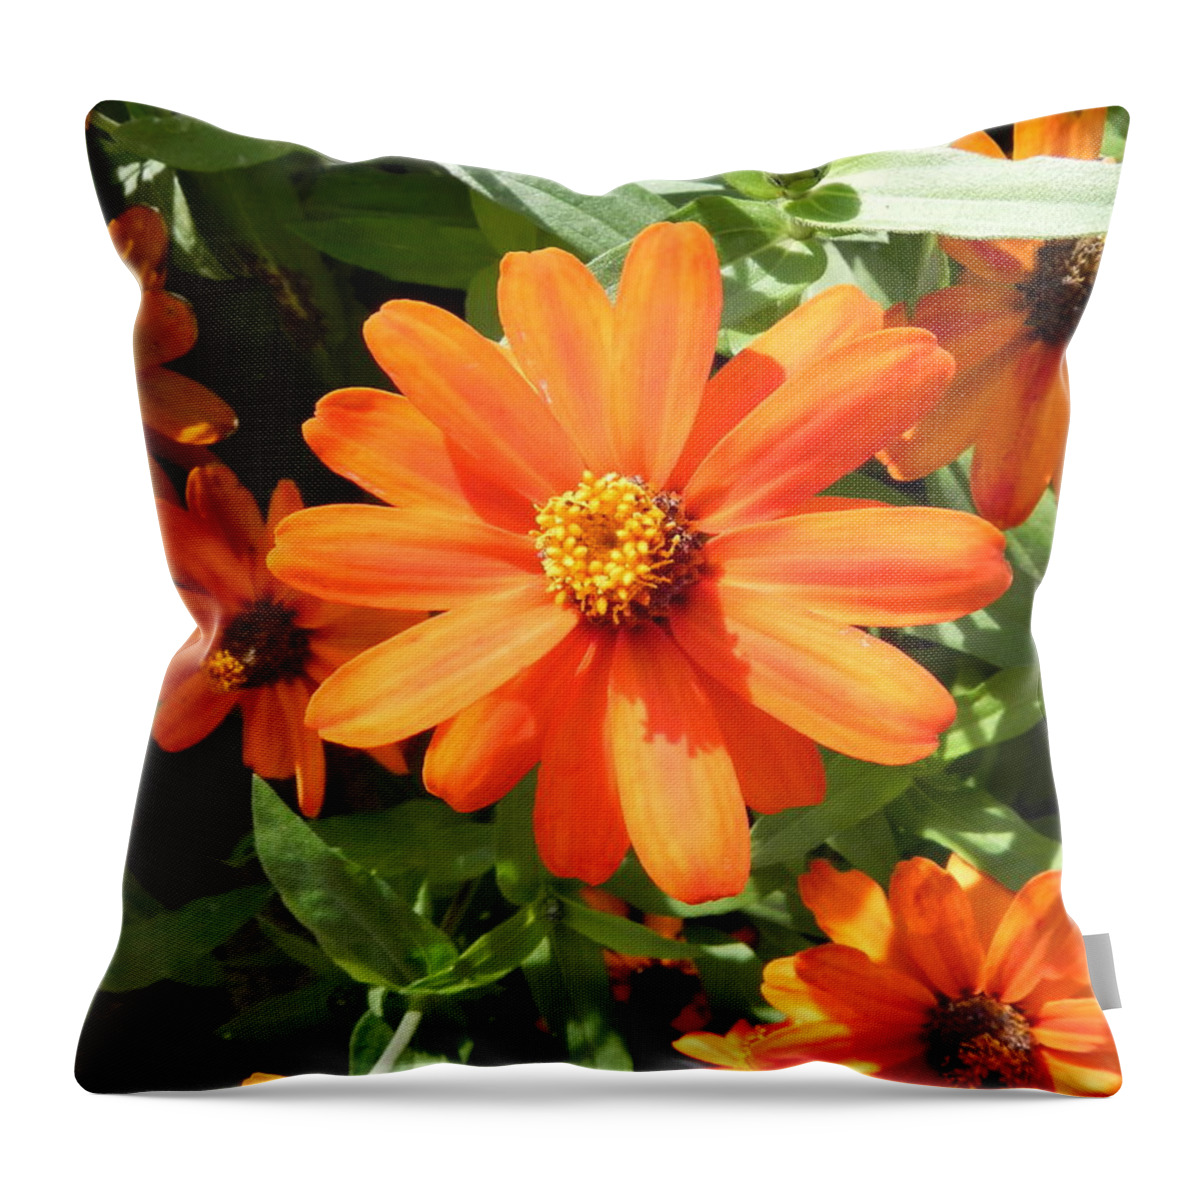  Throw Pillow featuring the photograph Orange Daisy by John Parry